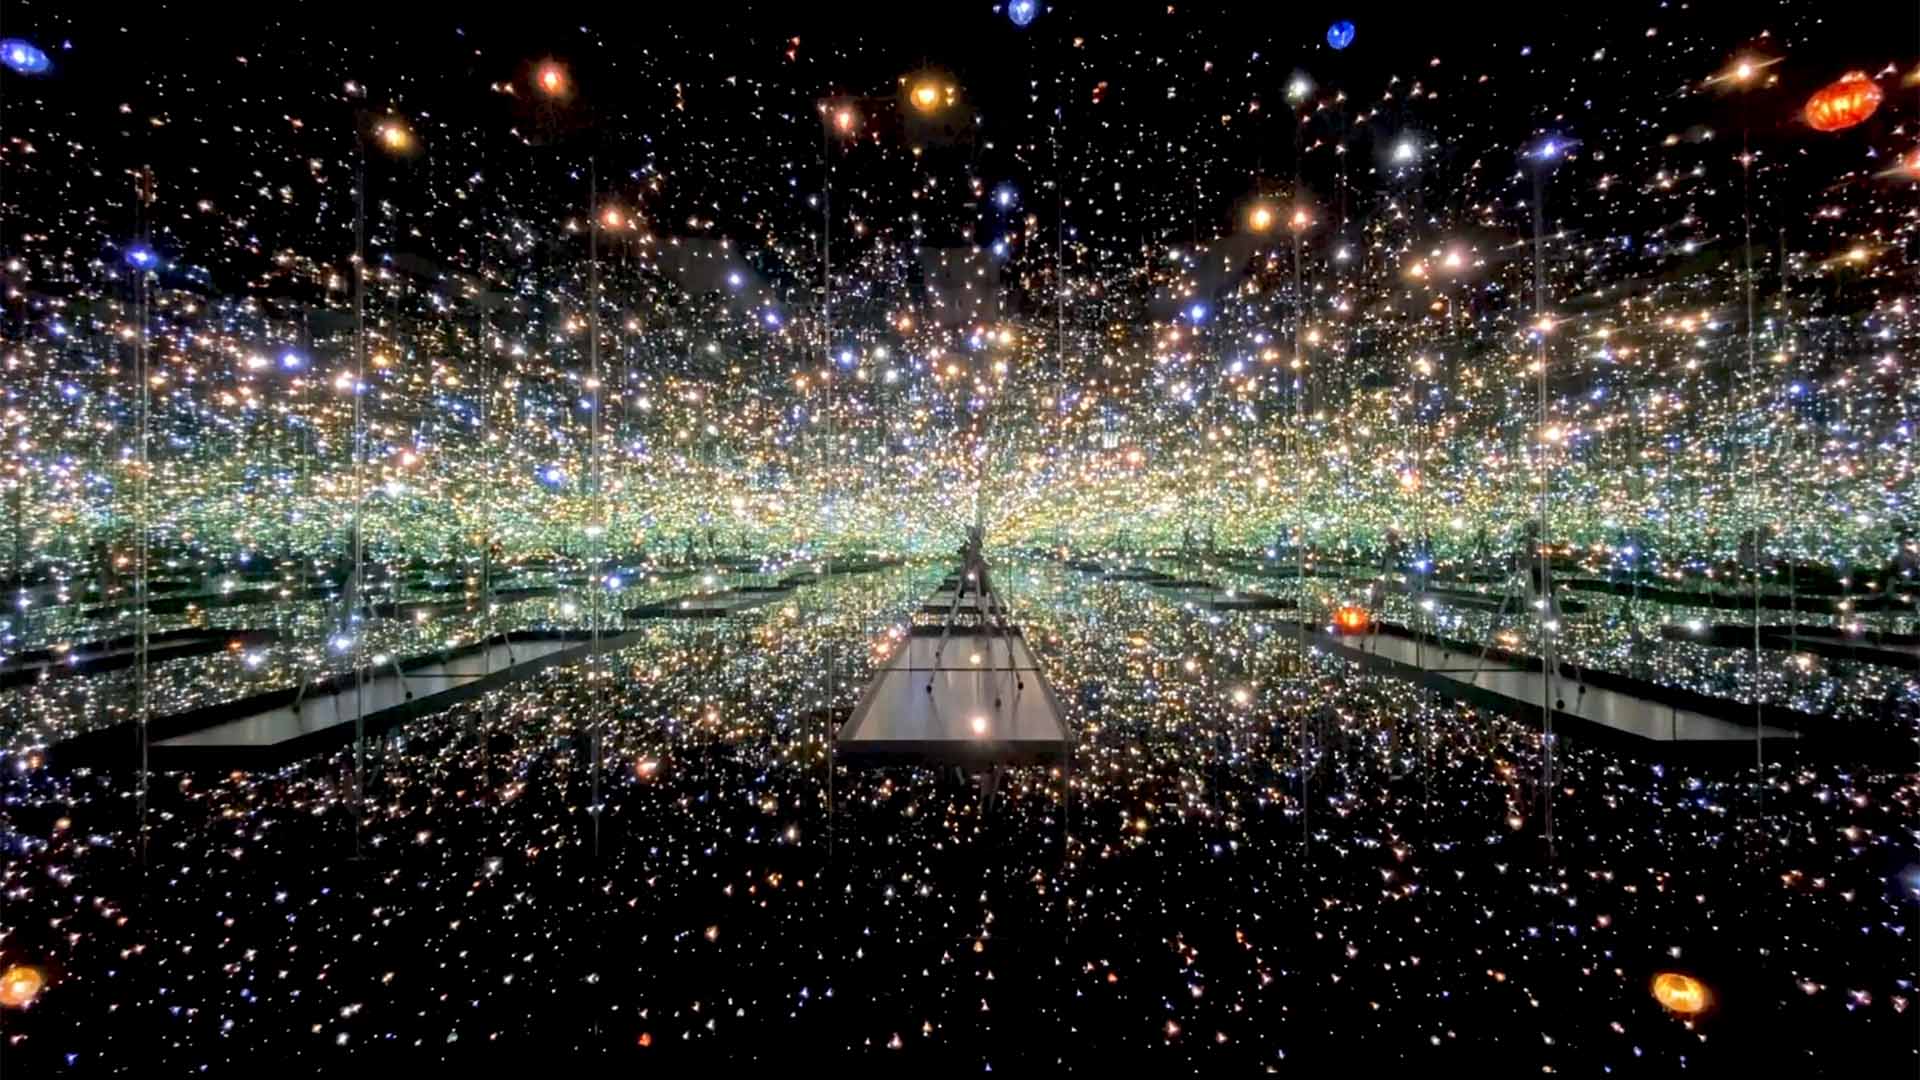 You Can Now Tour One of Yayoi Kusama's Glittering Infinity Rooms From Your Couch